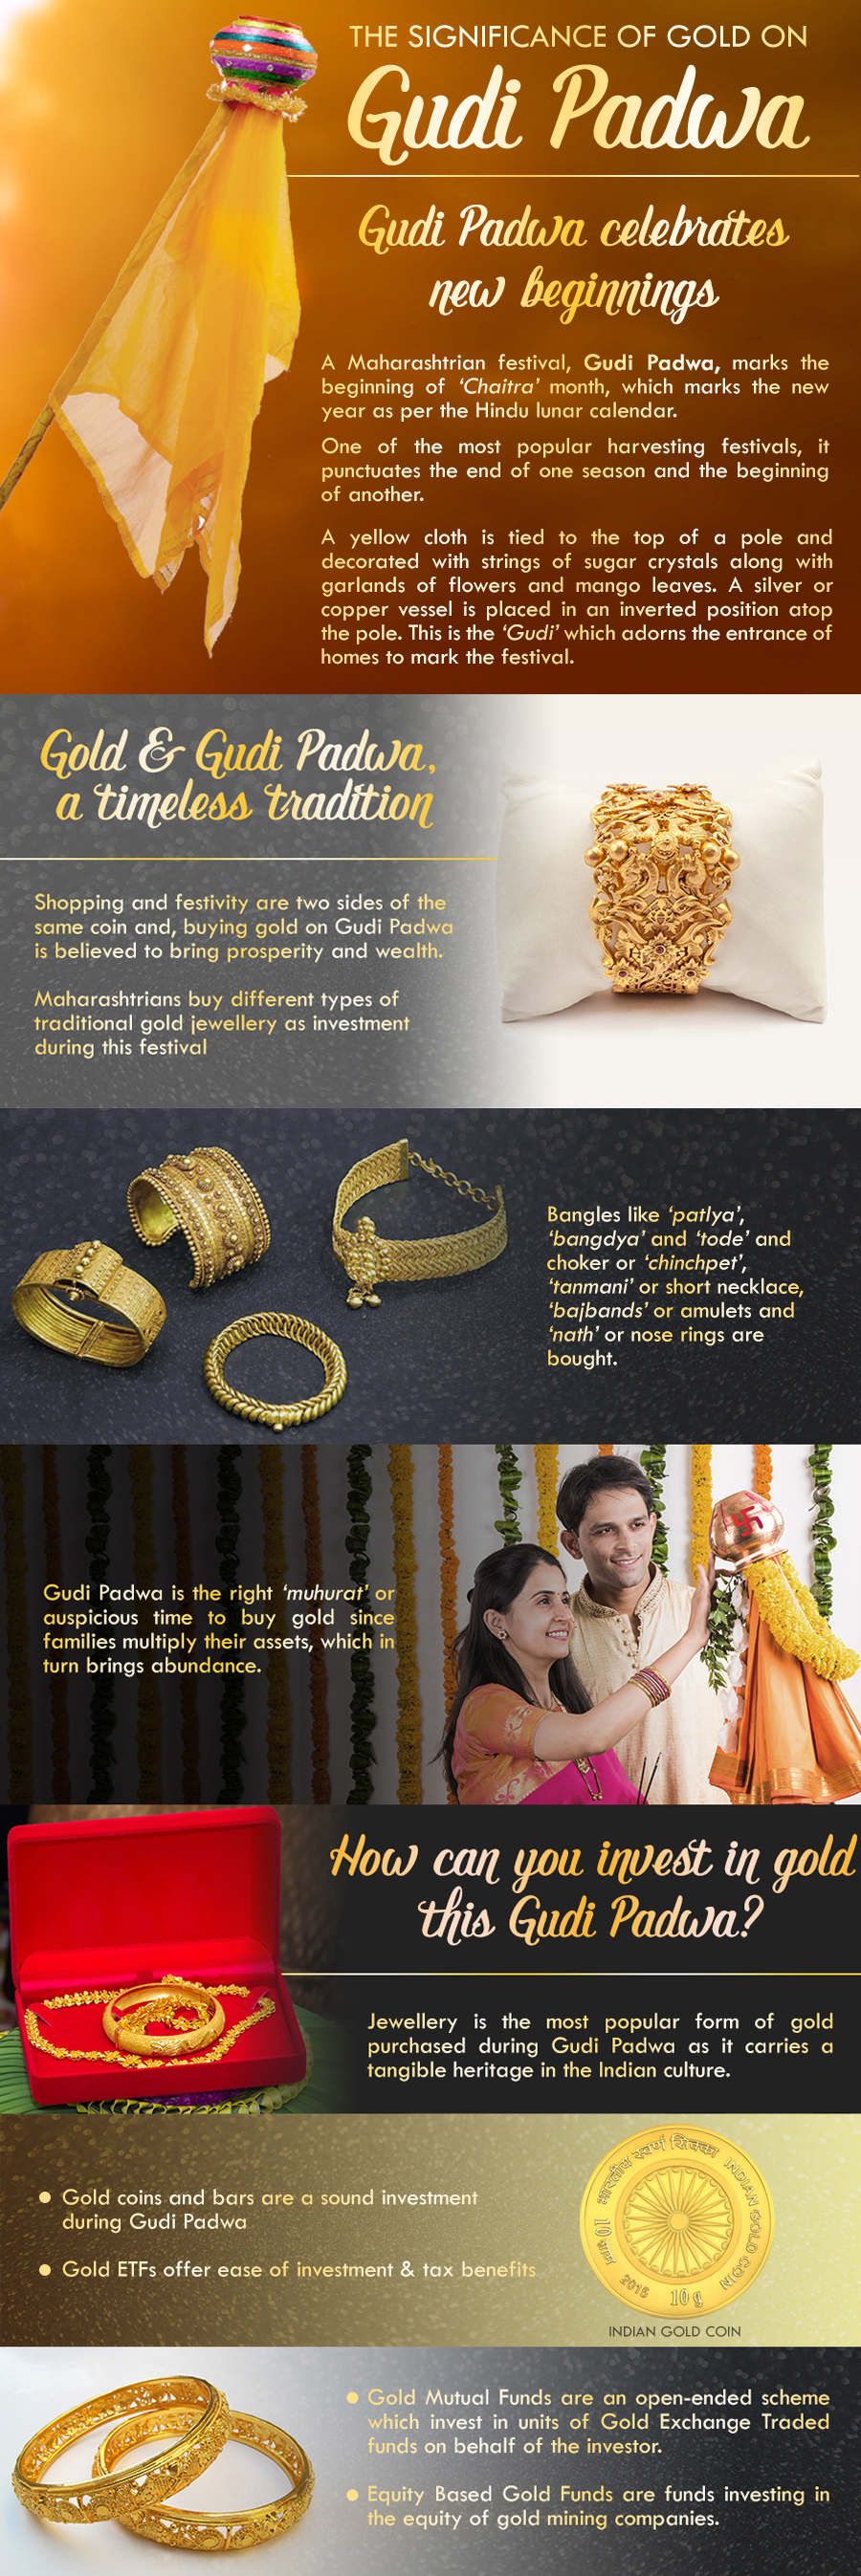 Gudi Padwa being an important festival, buying gold on this day is considered very auspicious in Maharashtra. Know about various ways you can buy or invest in gold on this special day.